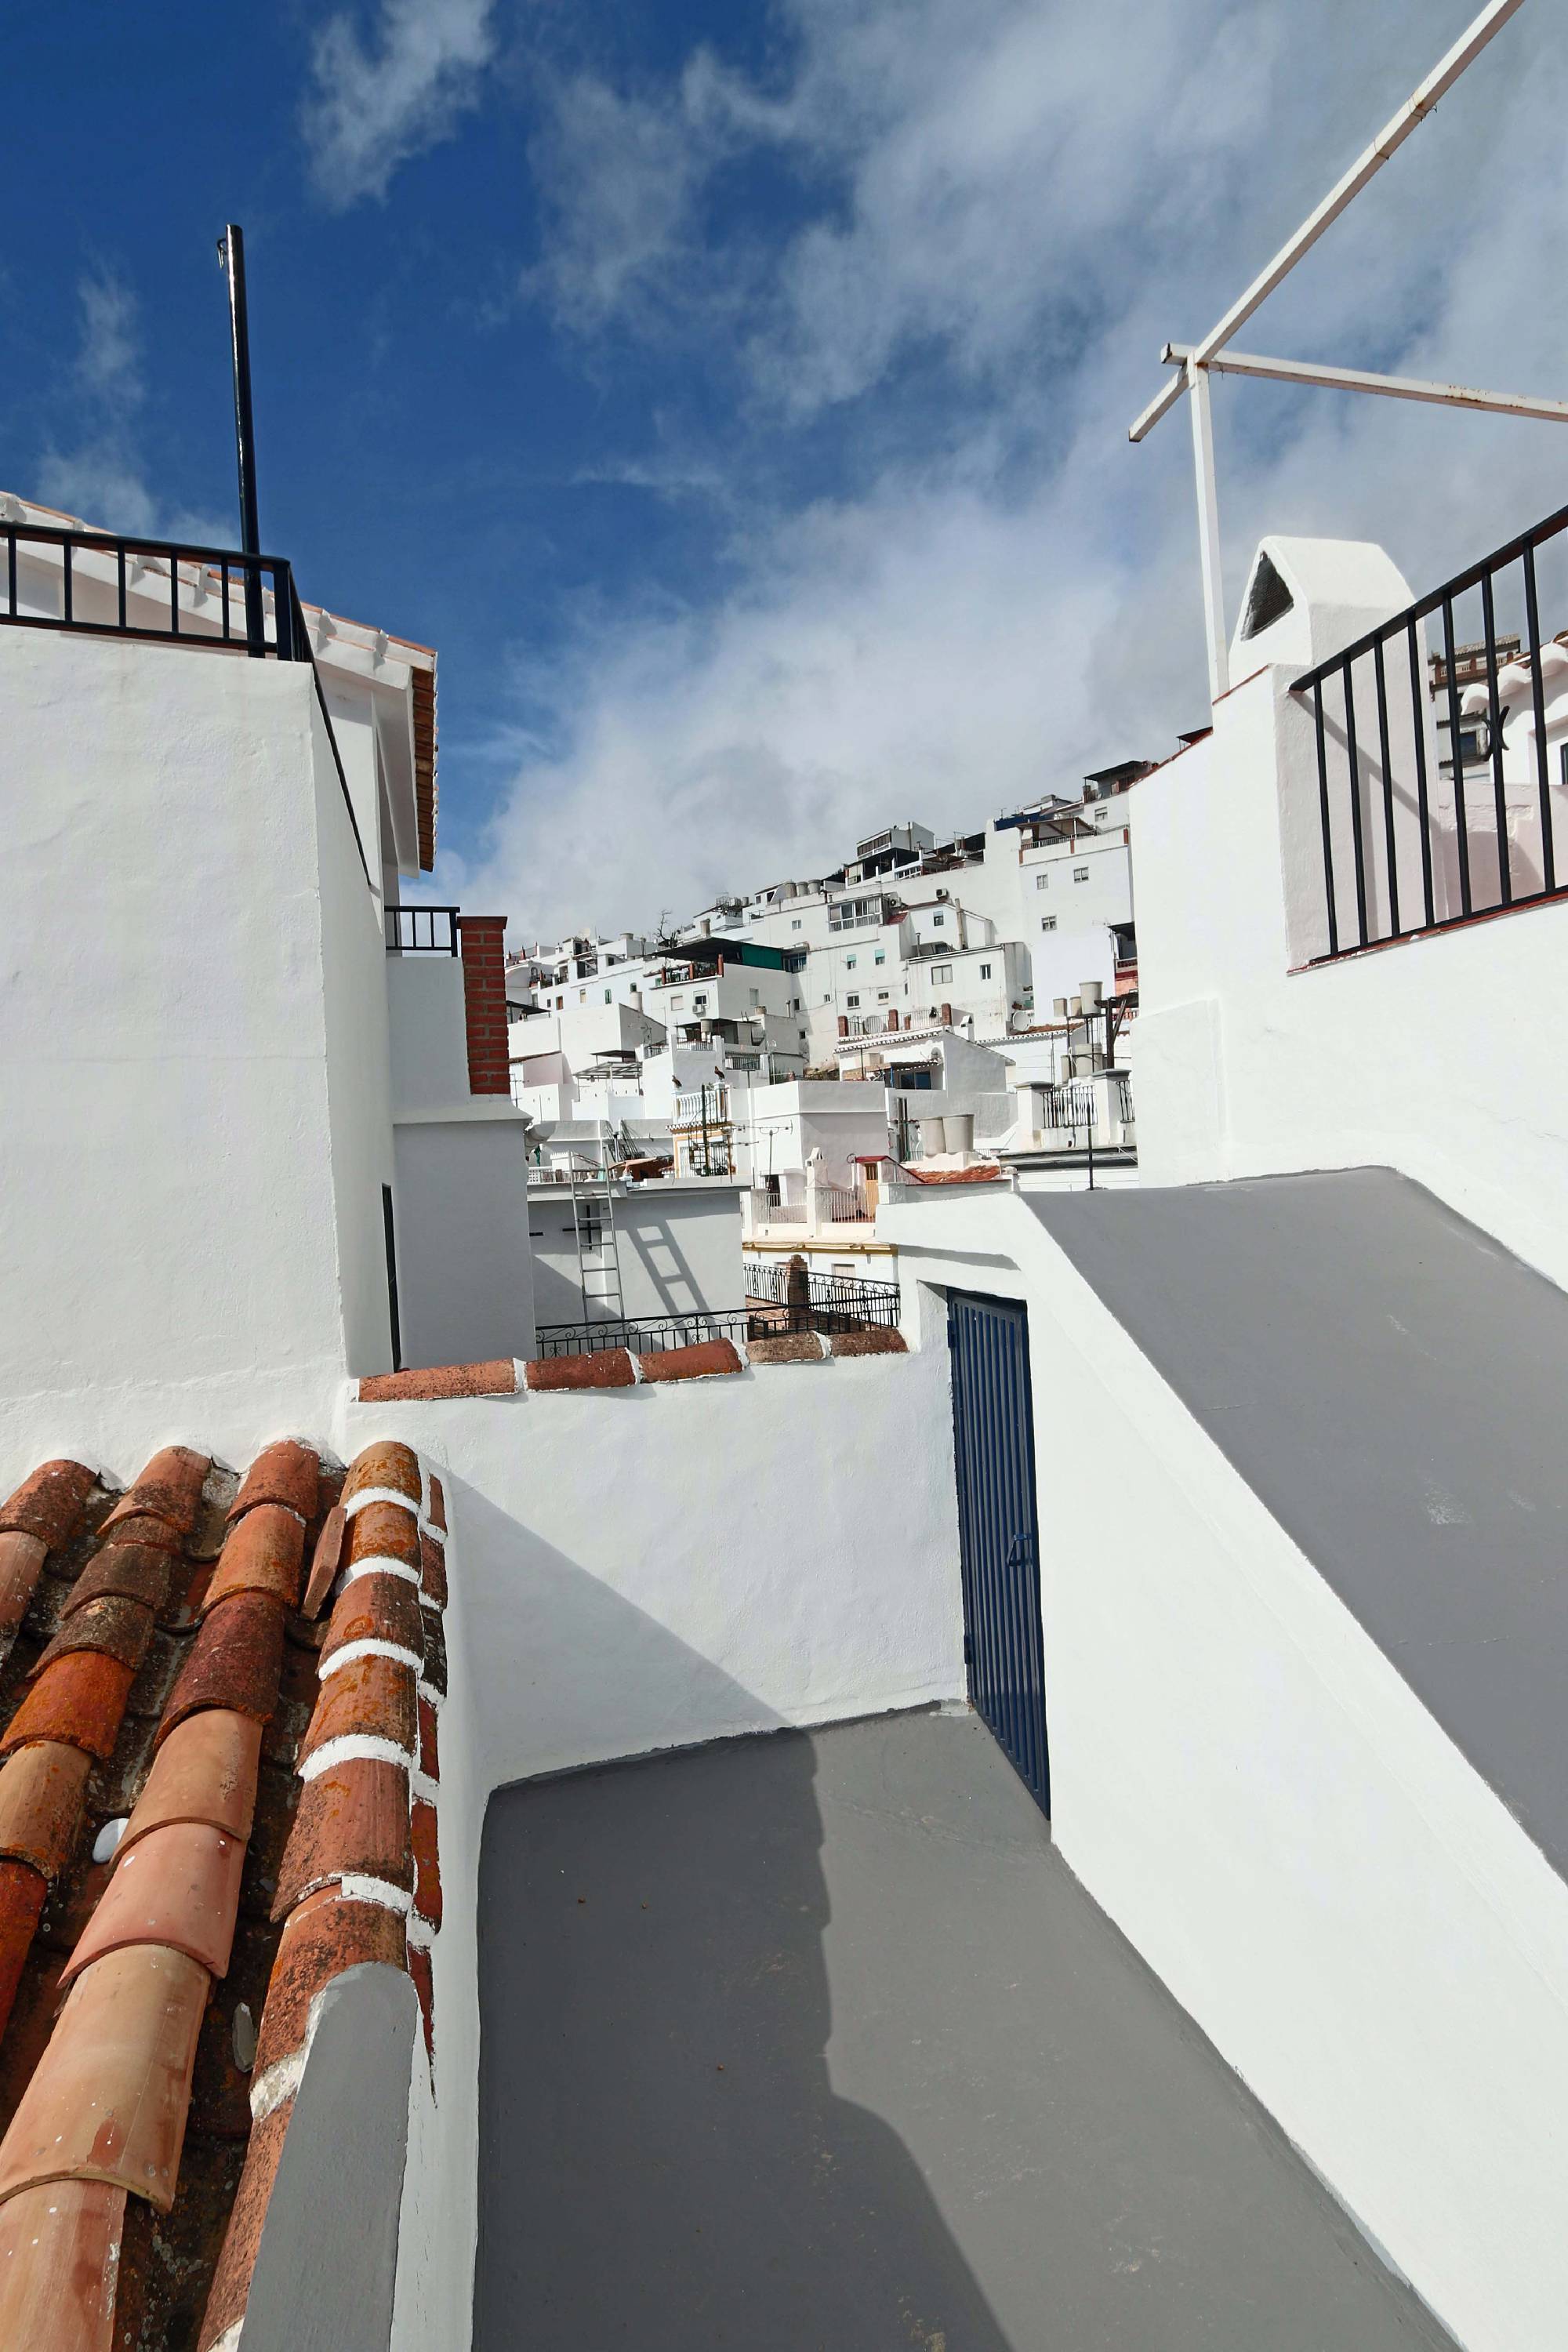 Holiday in Spain Competa, Costa del Sol village town for holiday rental